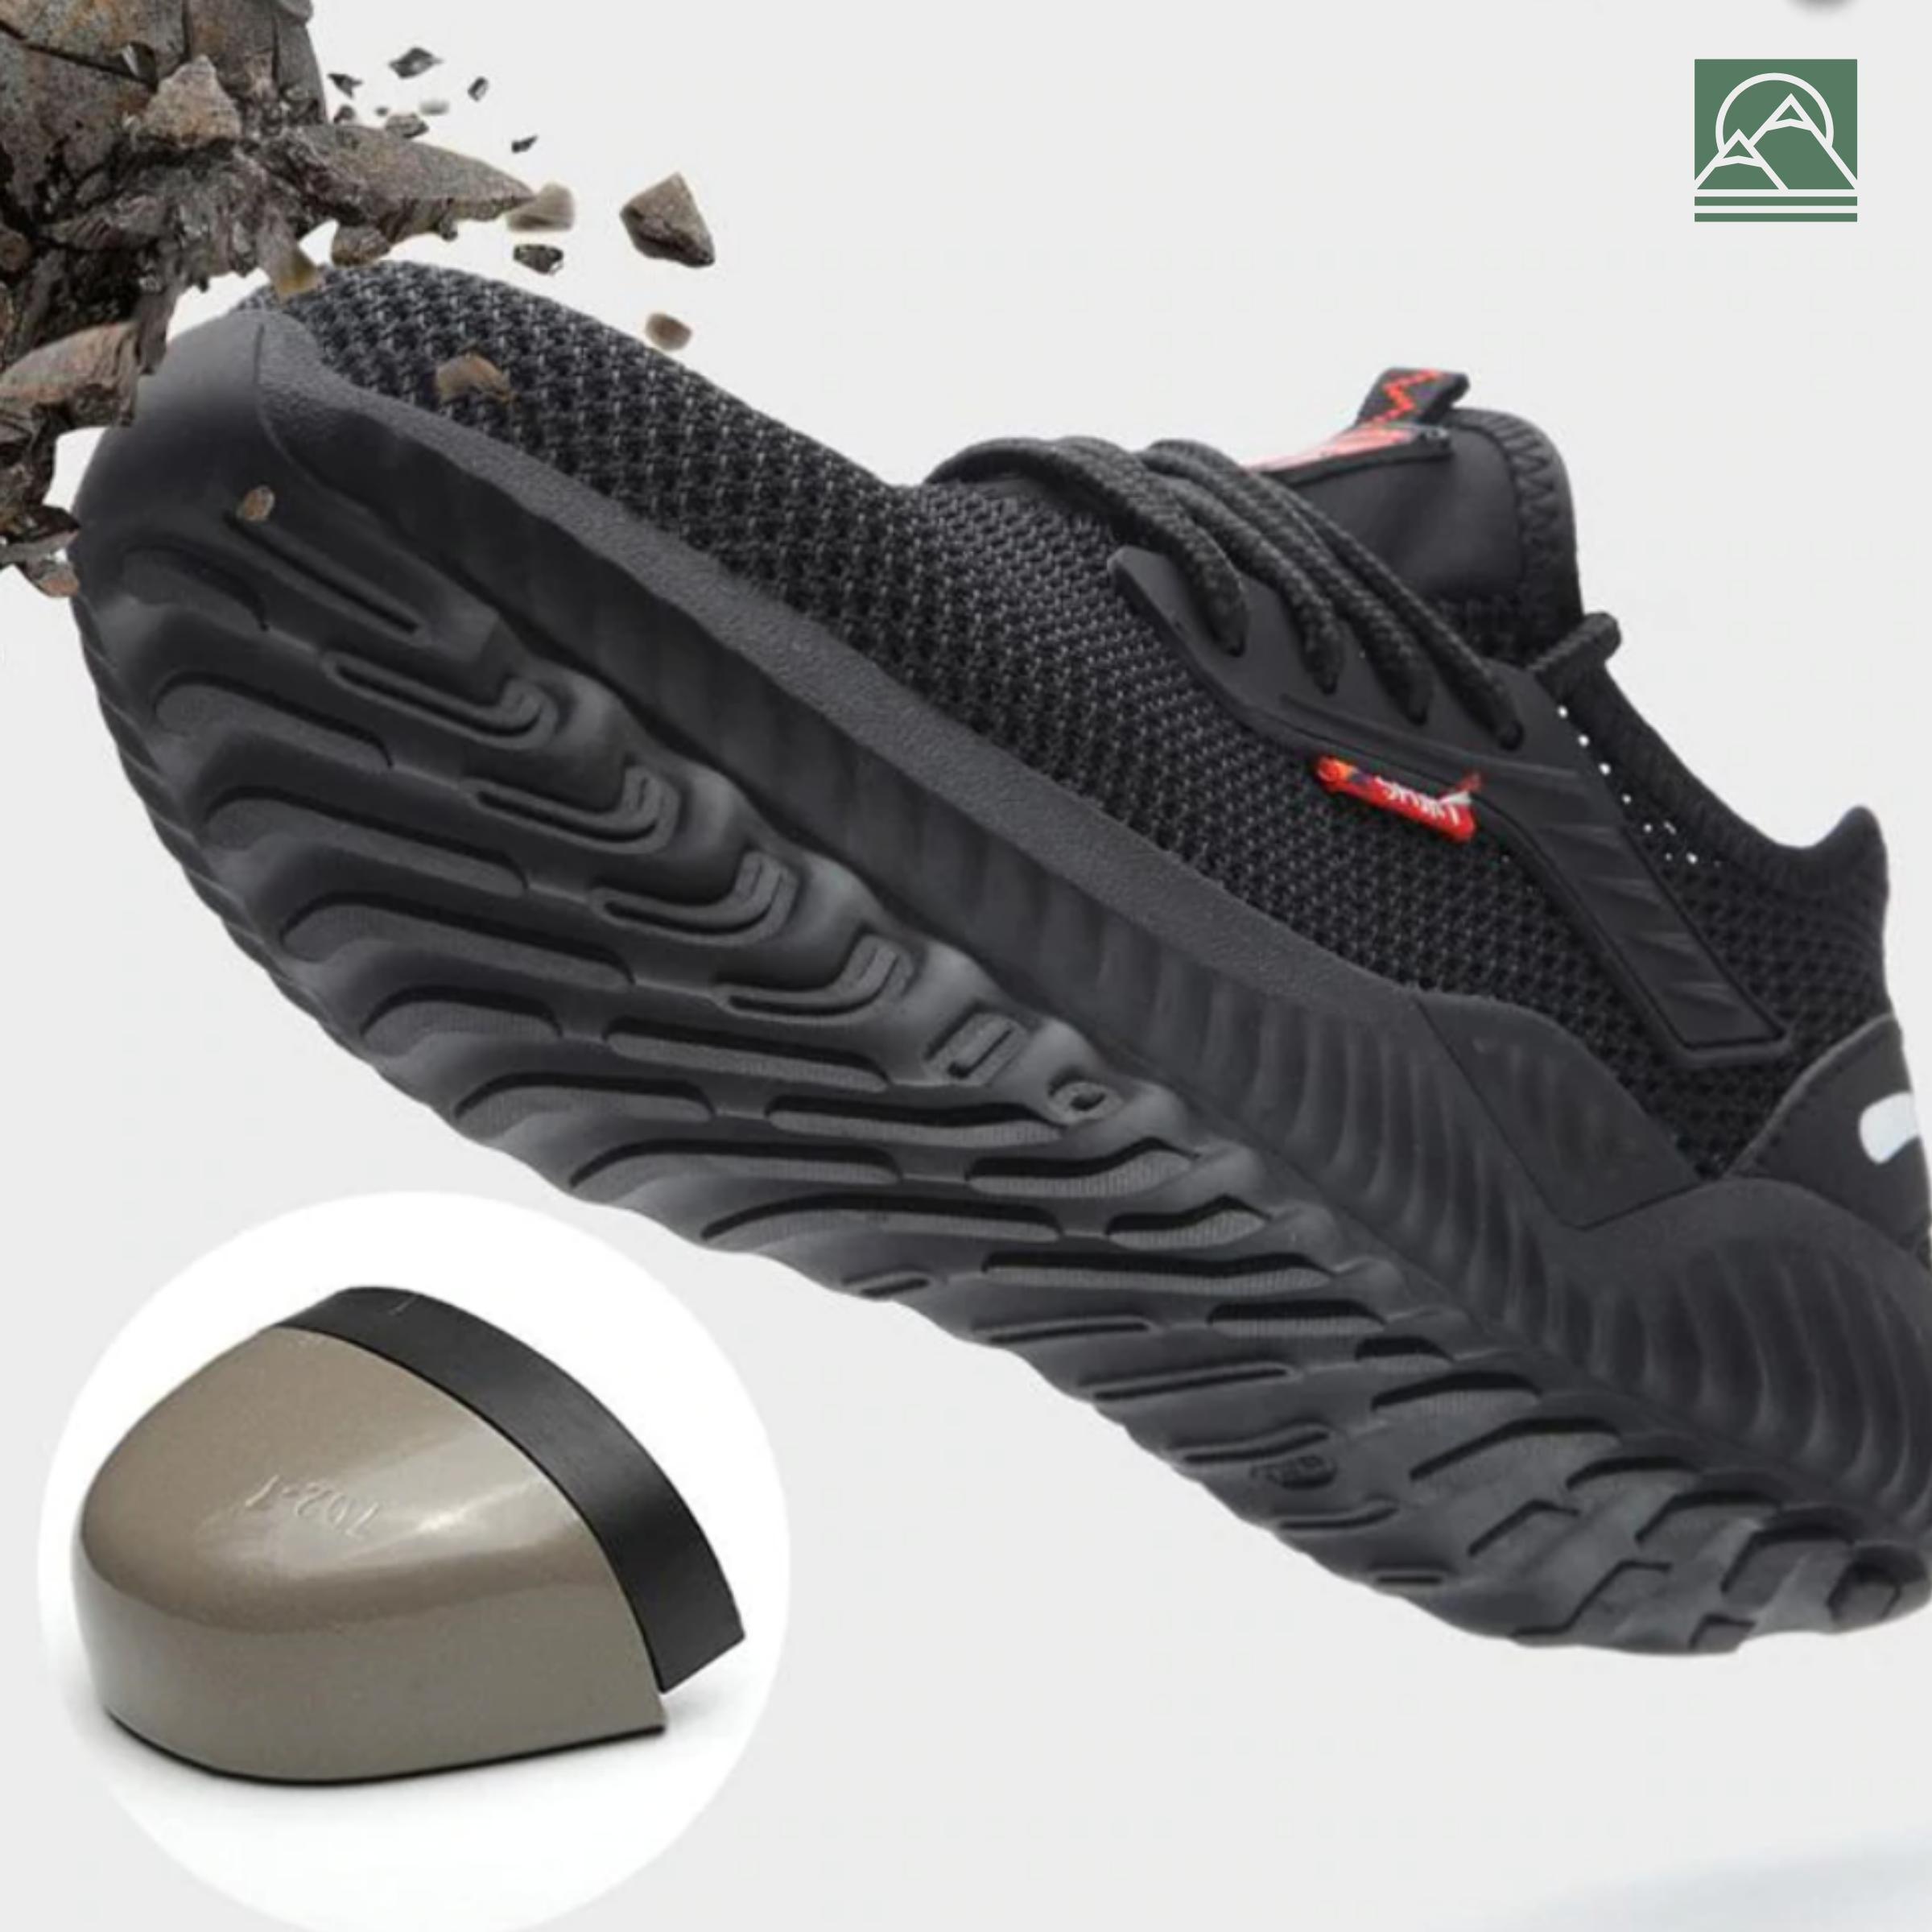 Steel toe shoes - Men's and Women's Safety Shoes